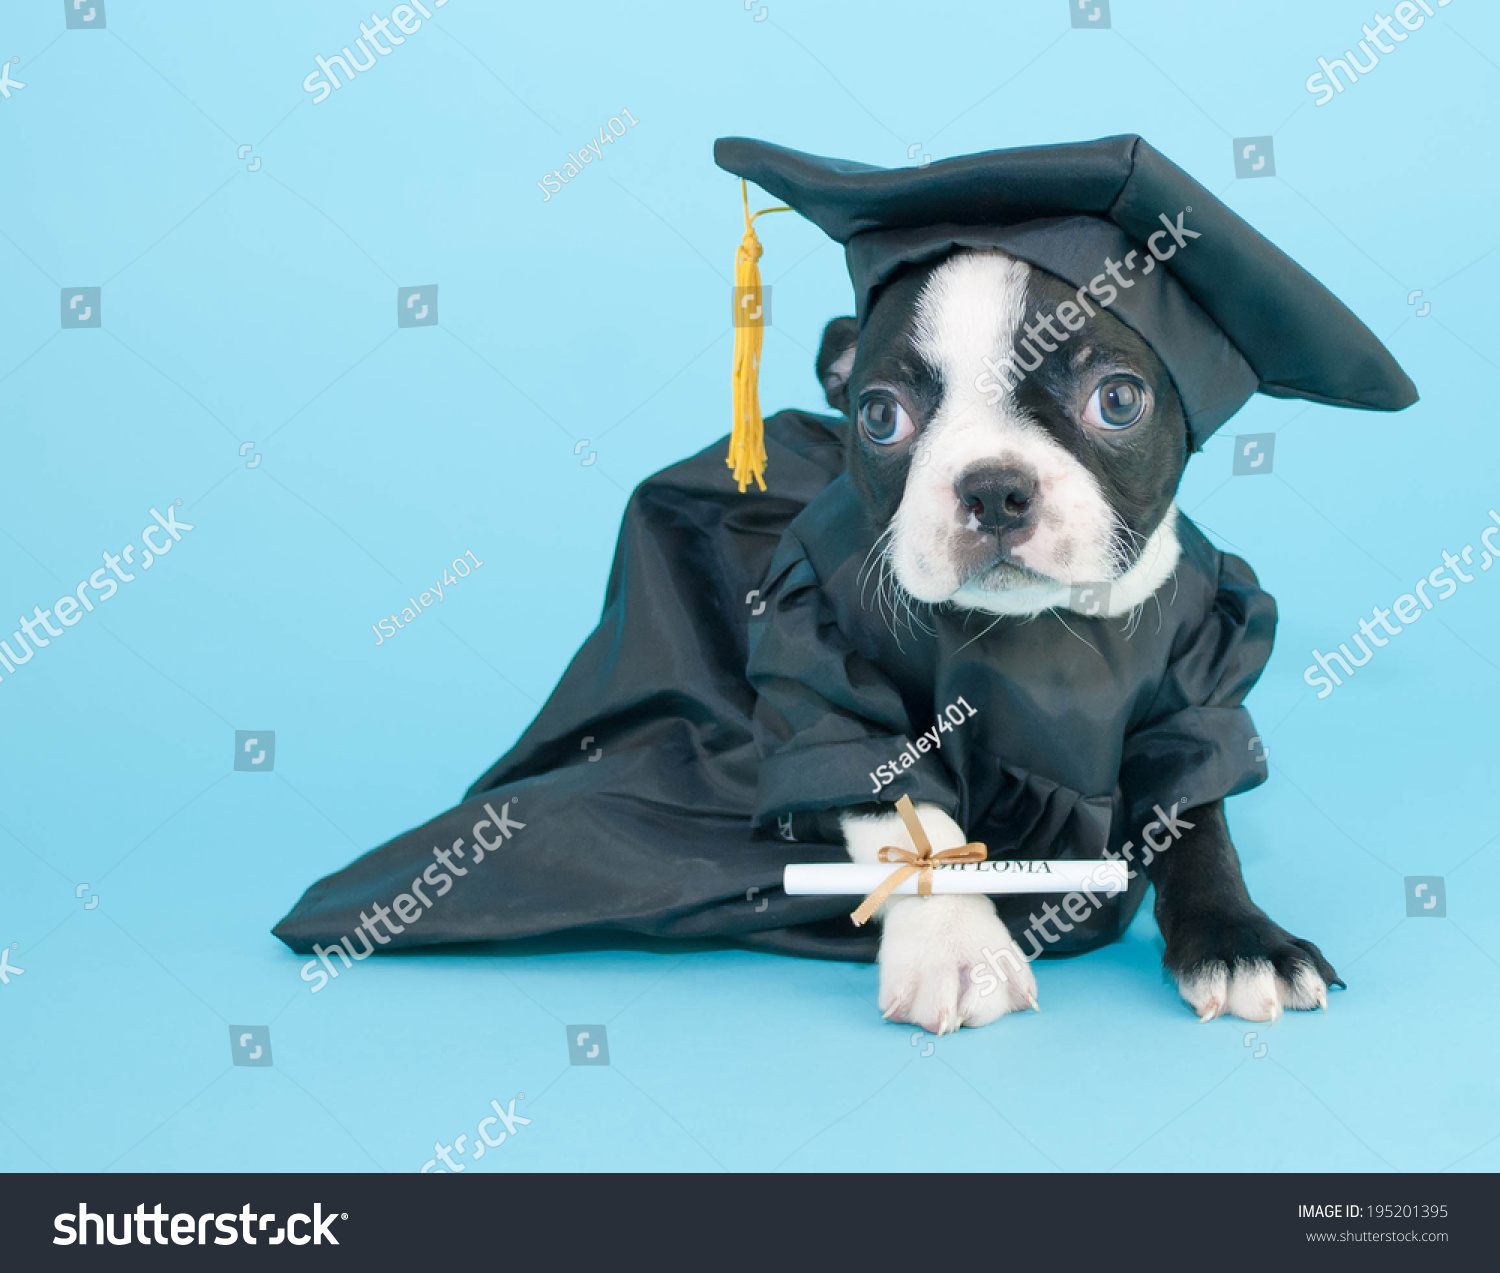 Boston Terrier Puppy Dressed Cap Gown Stock Photo 195201395 ...